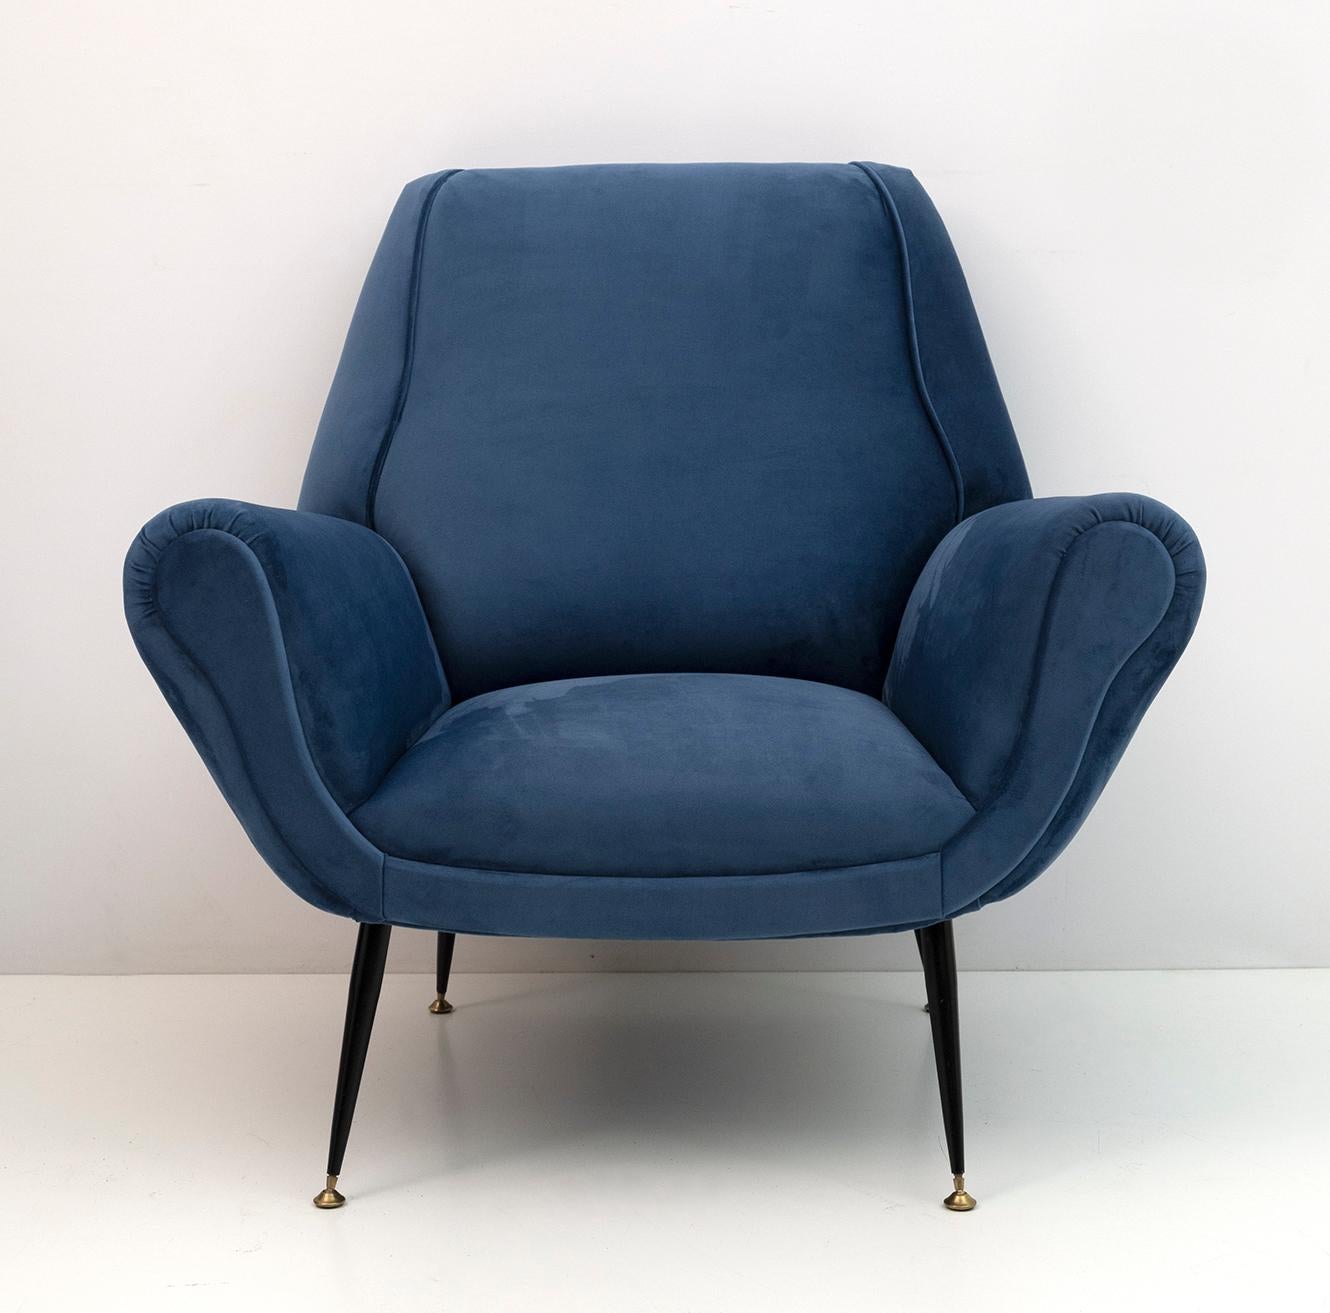 Armchair designed by Gigi Radice for Minotti. Made with solid wood structure and blue velvet upholstery with metal and brass legs. The structure is authentic, only the upholstery and padding have been replaced.